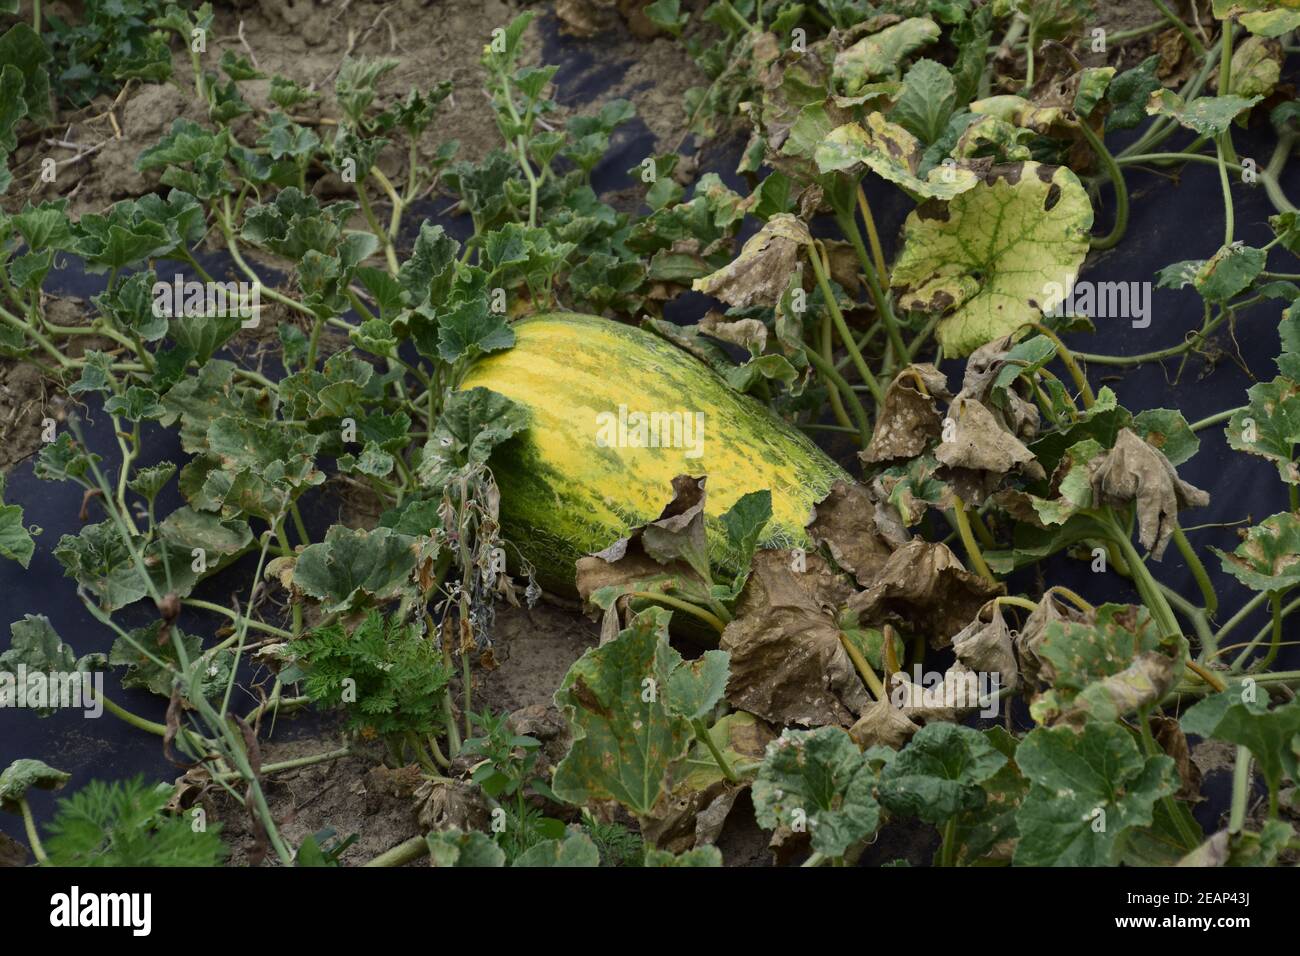 The growing water-melon in the field Stock Photo